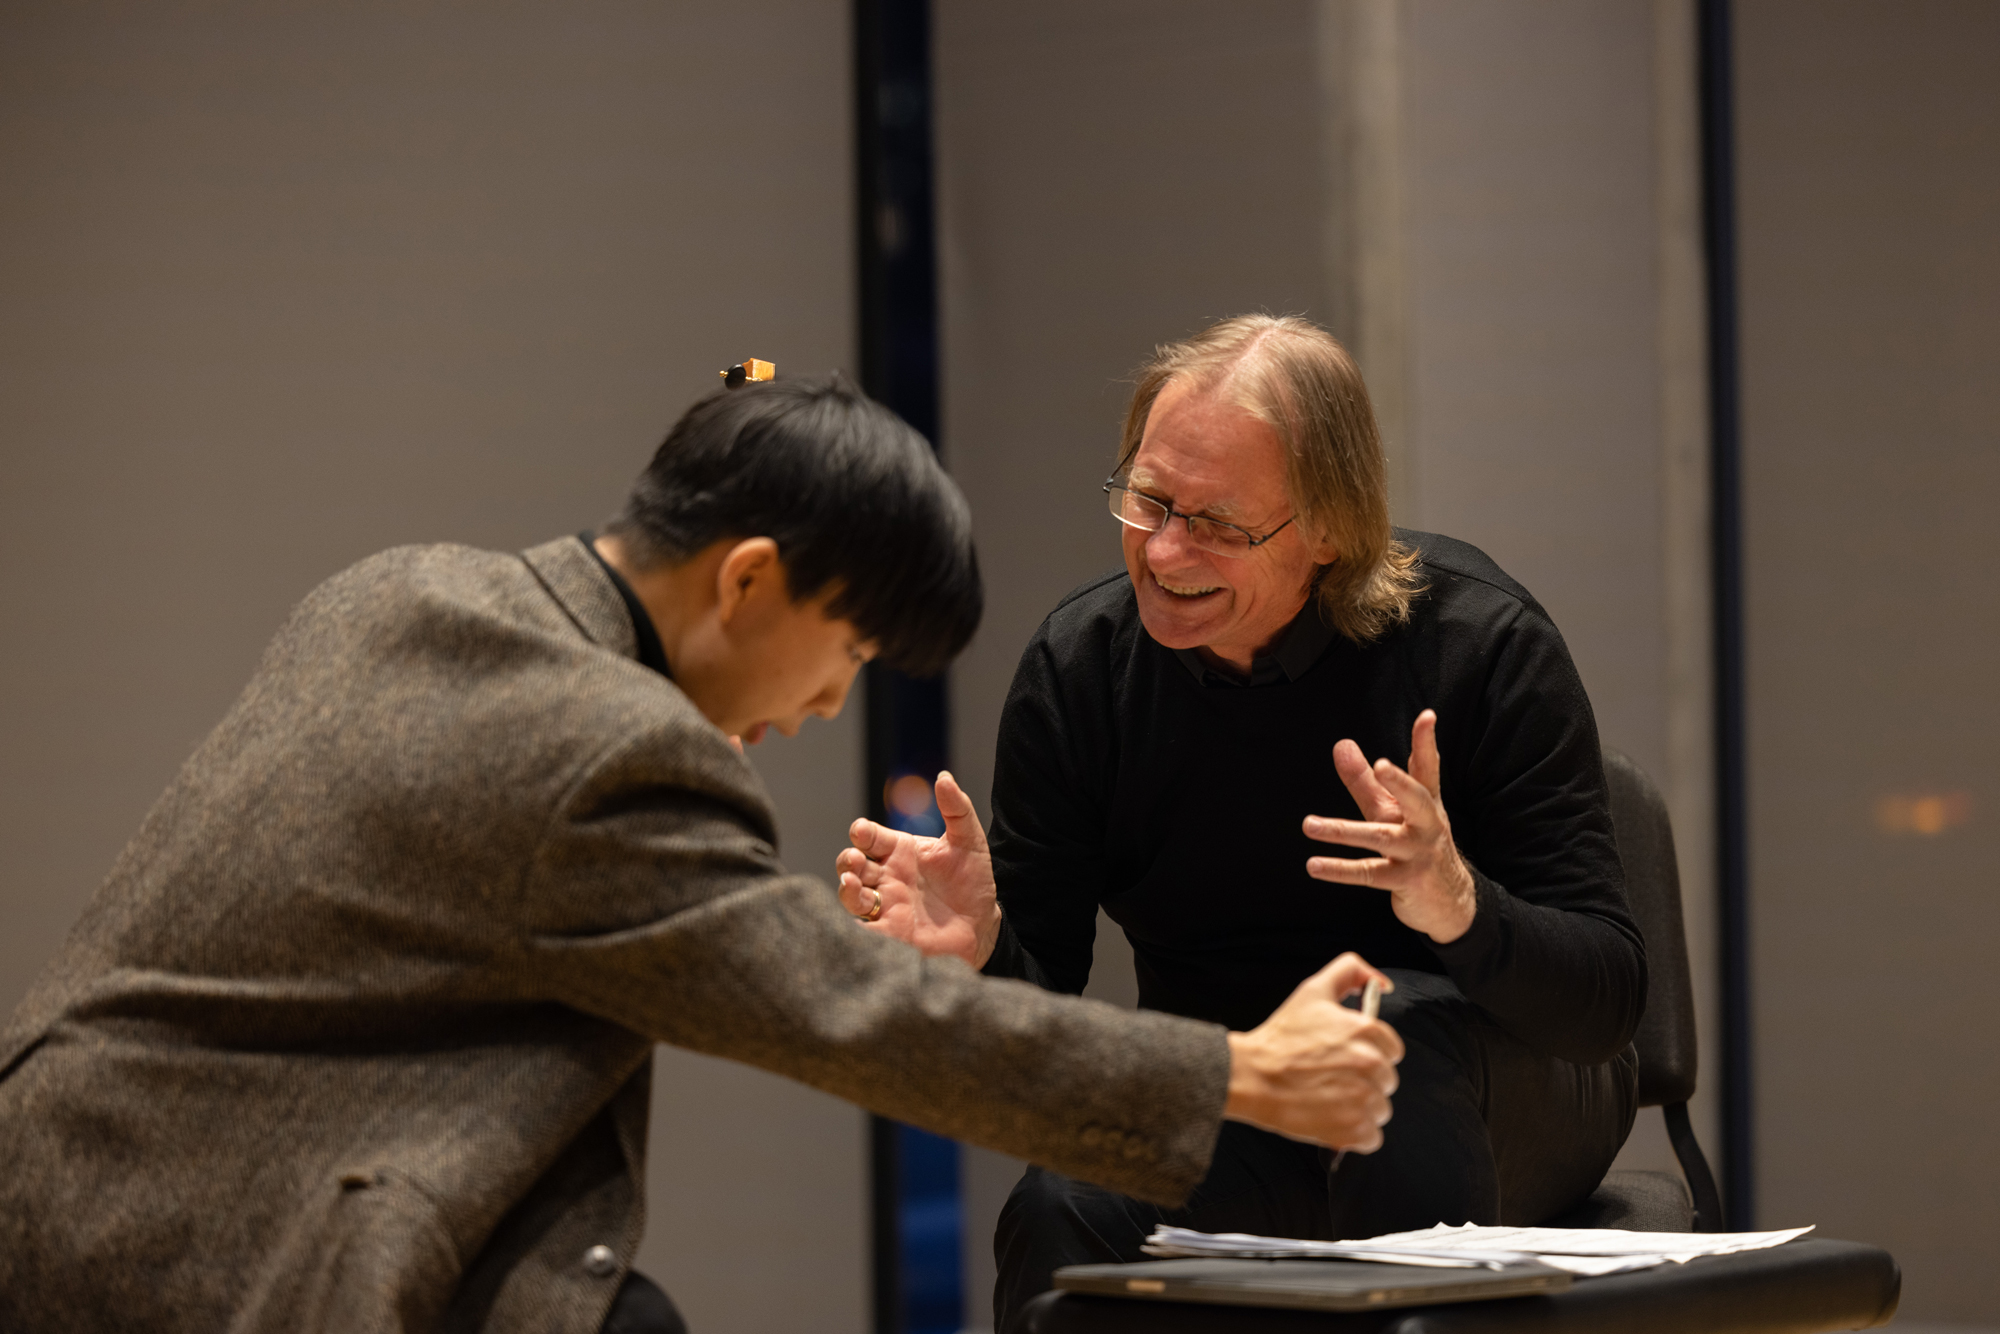 David Russell gestures musically with a student in a masterclass setting